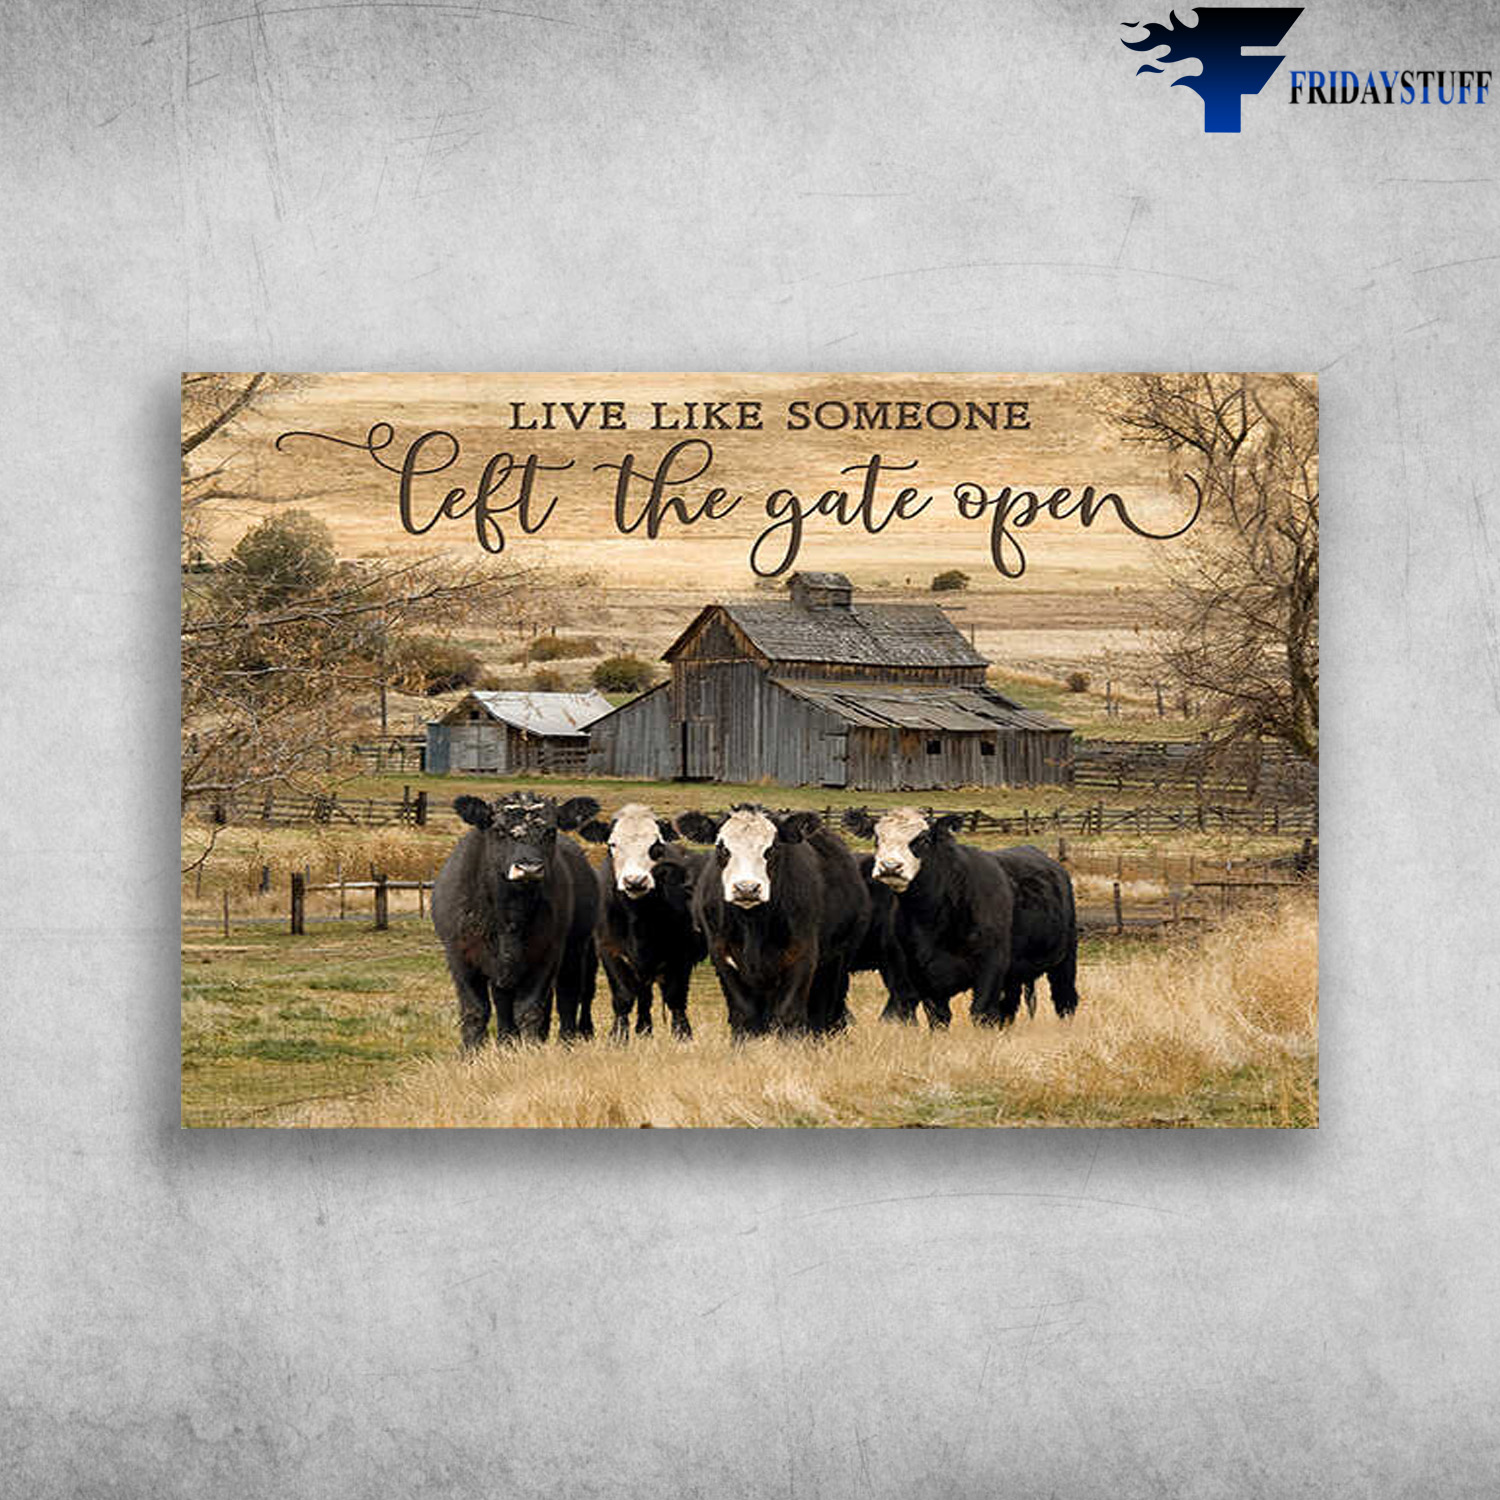 Black Cow On The Farm - Live Like Someone, Left The Gate Open